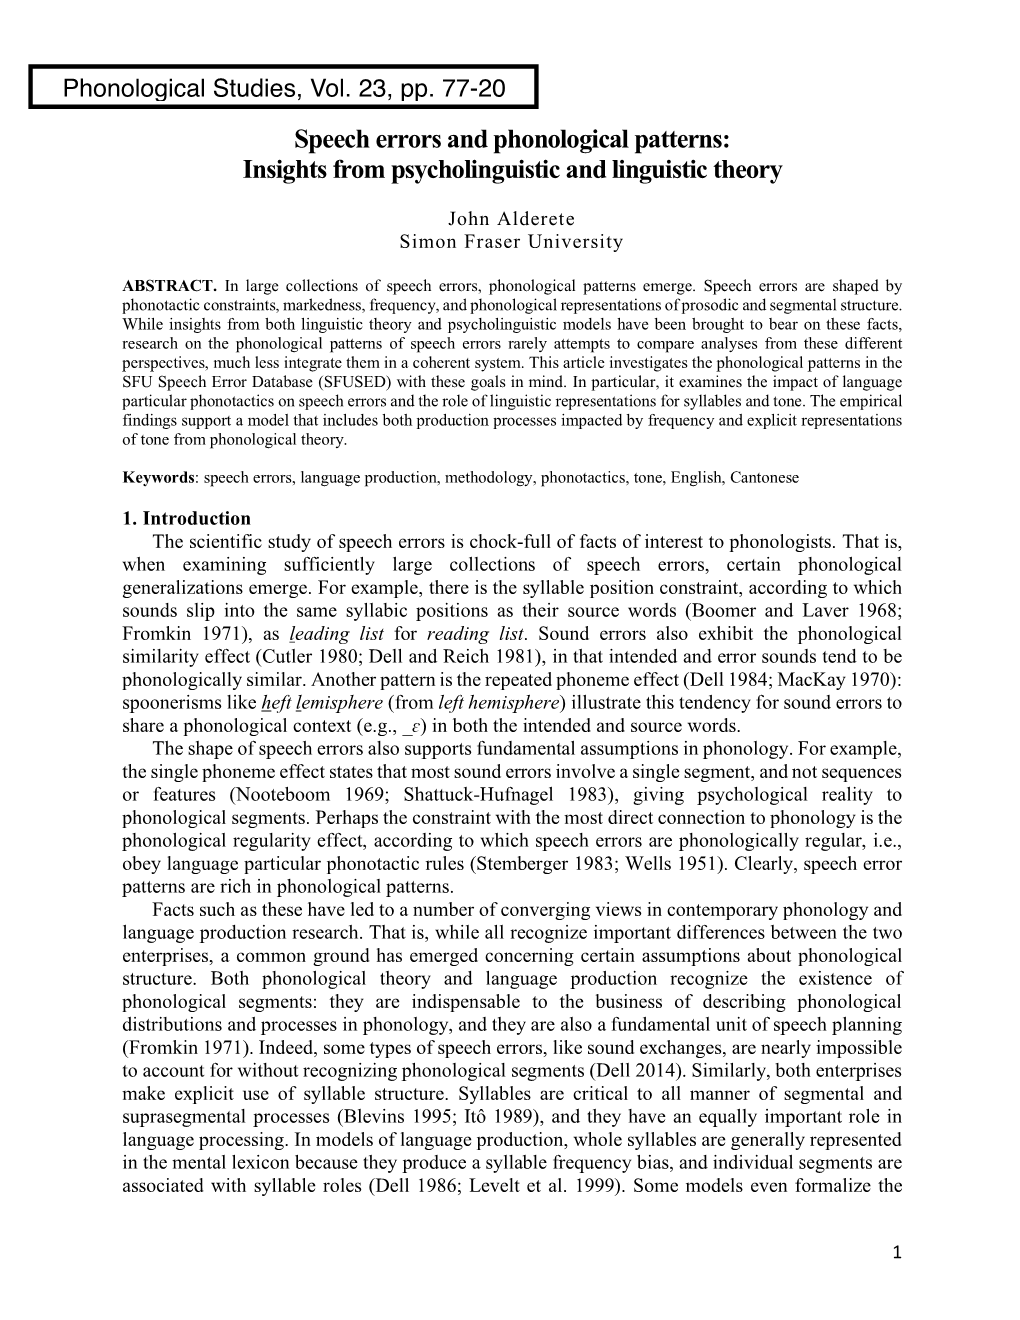 Speech Errors and Phonological Patterns: Insights from Psycholinguistic and Linguistic Theory